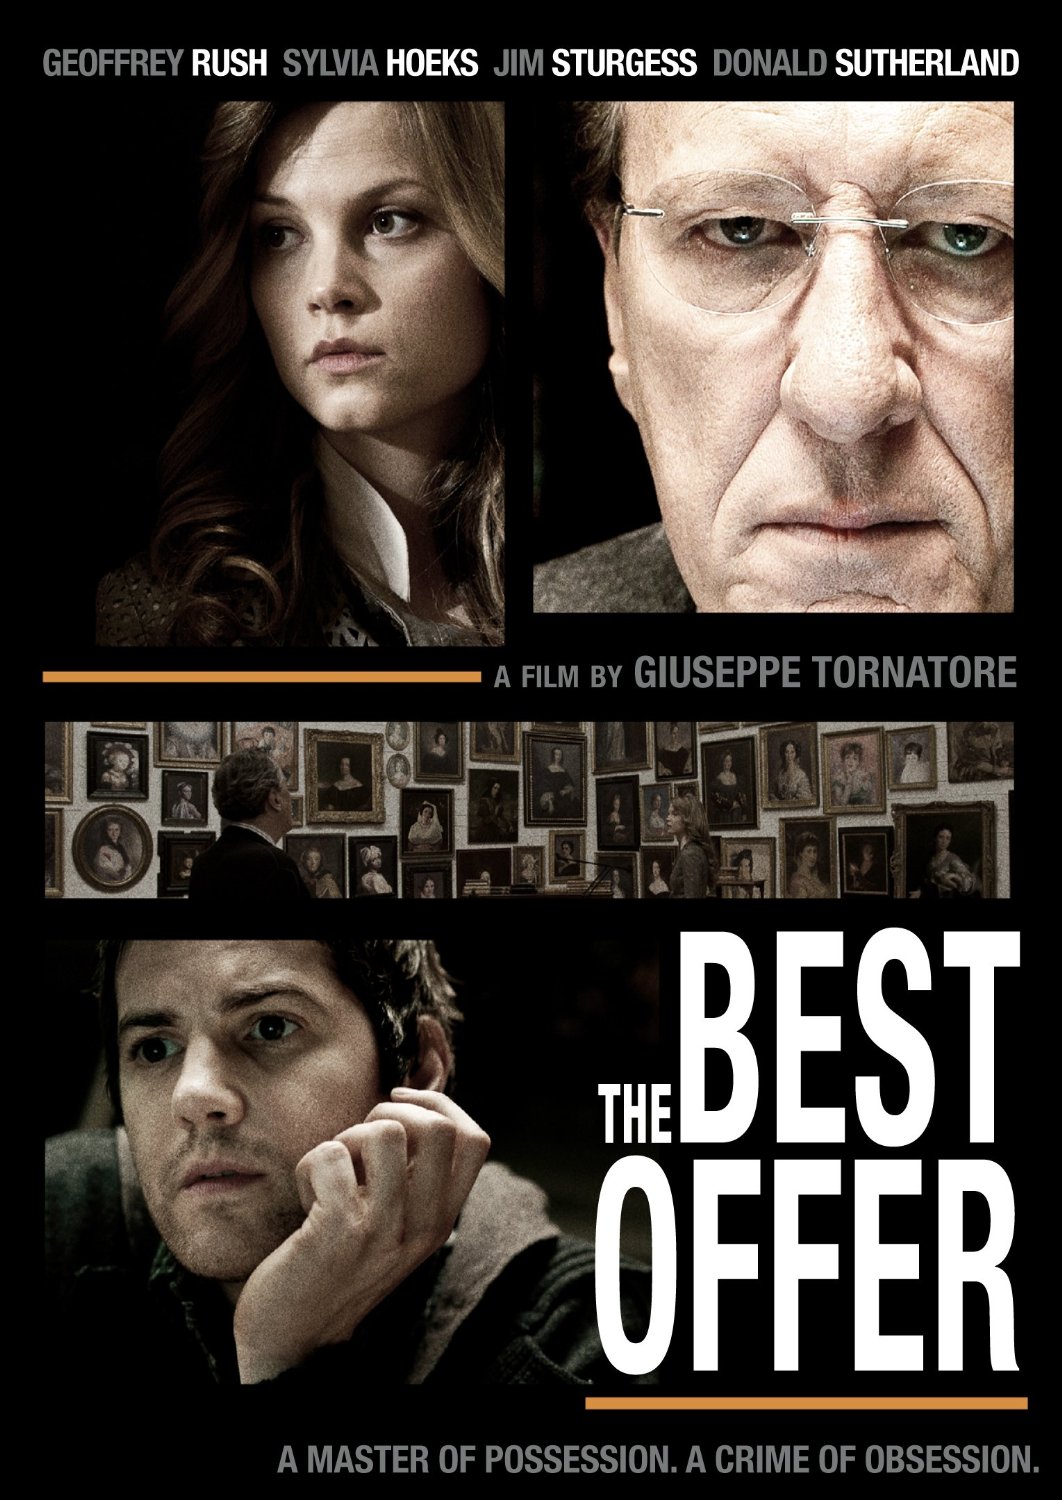 The Best Offer (2013) directed by Giuseppe Tornatore • Reviews, film + cast  • Letterboxd